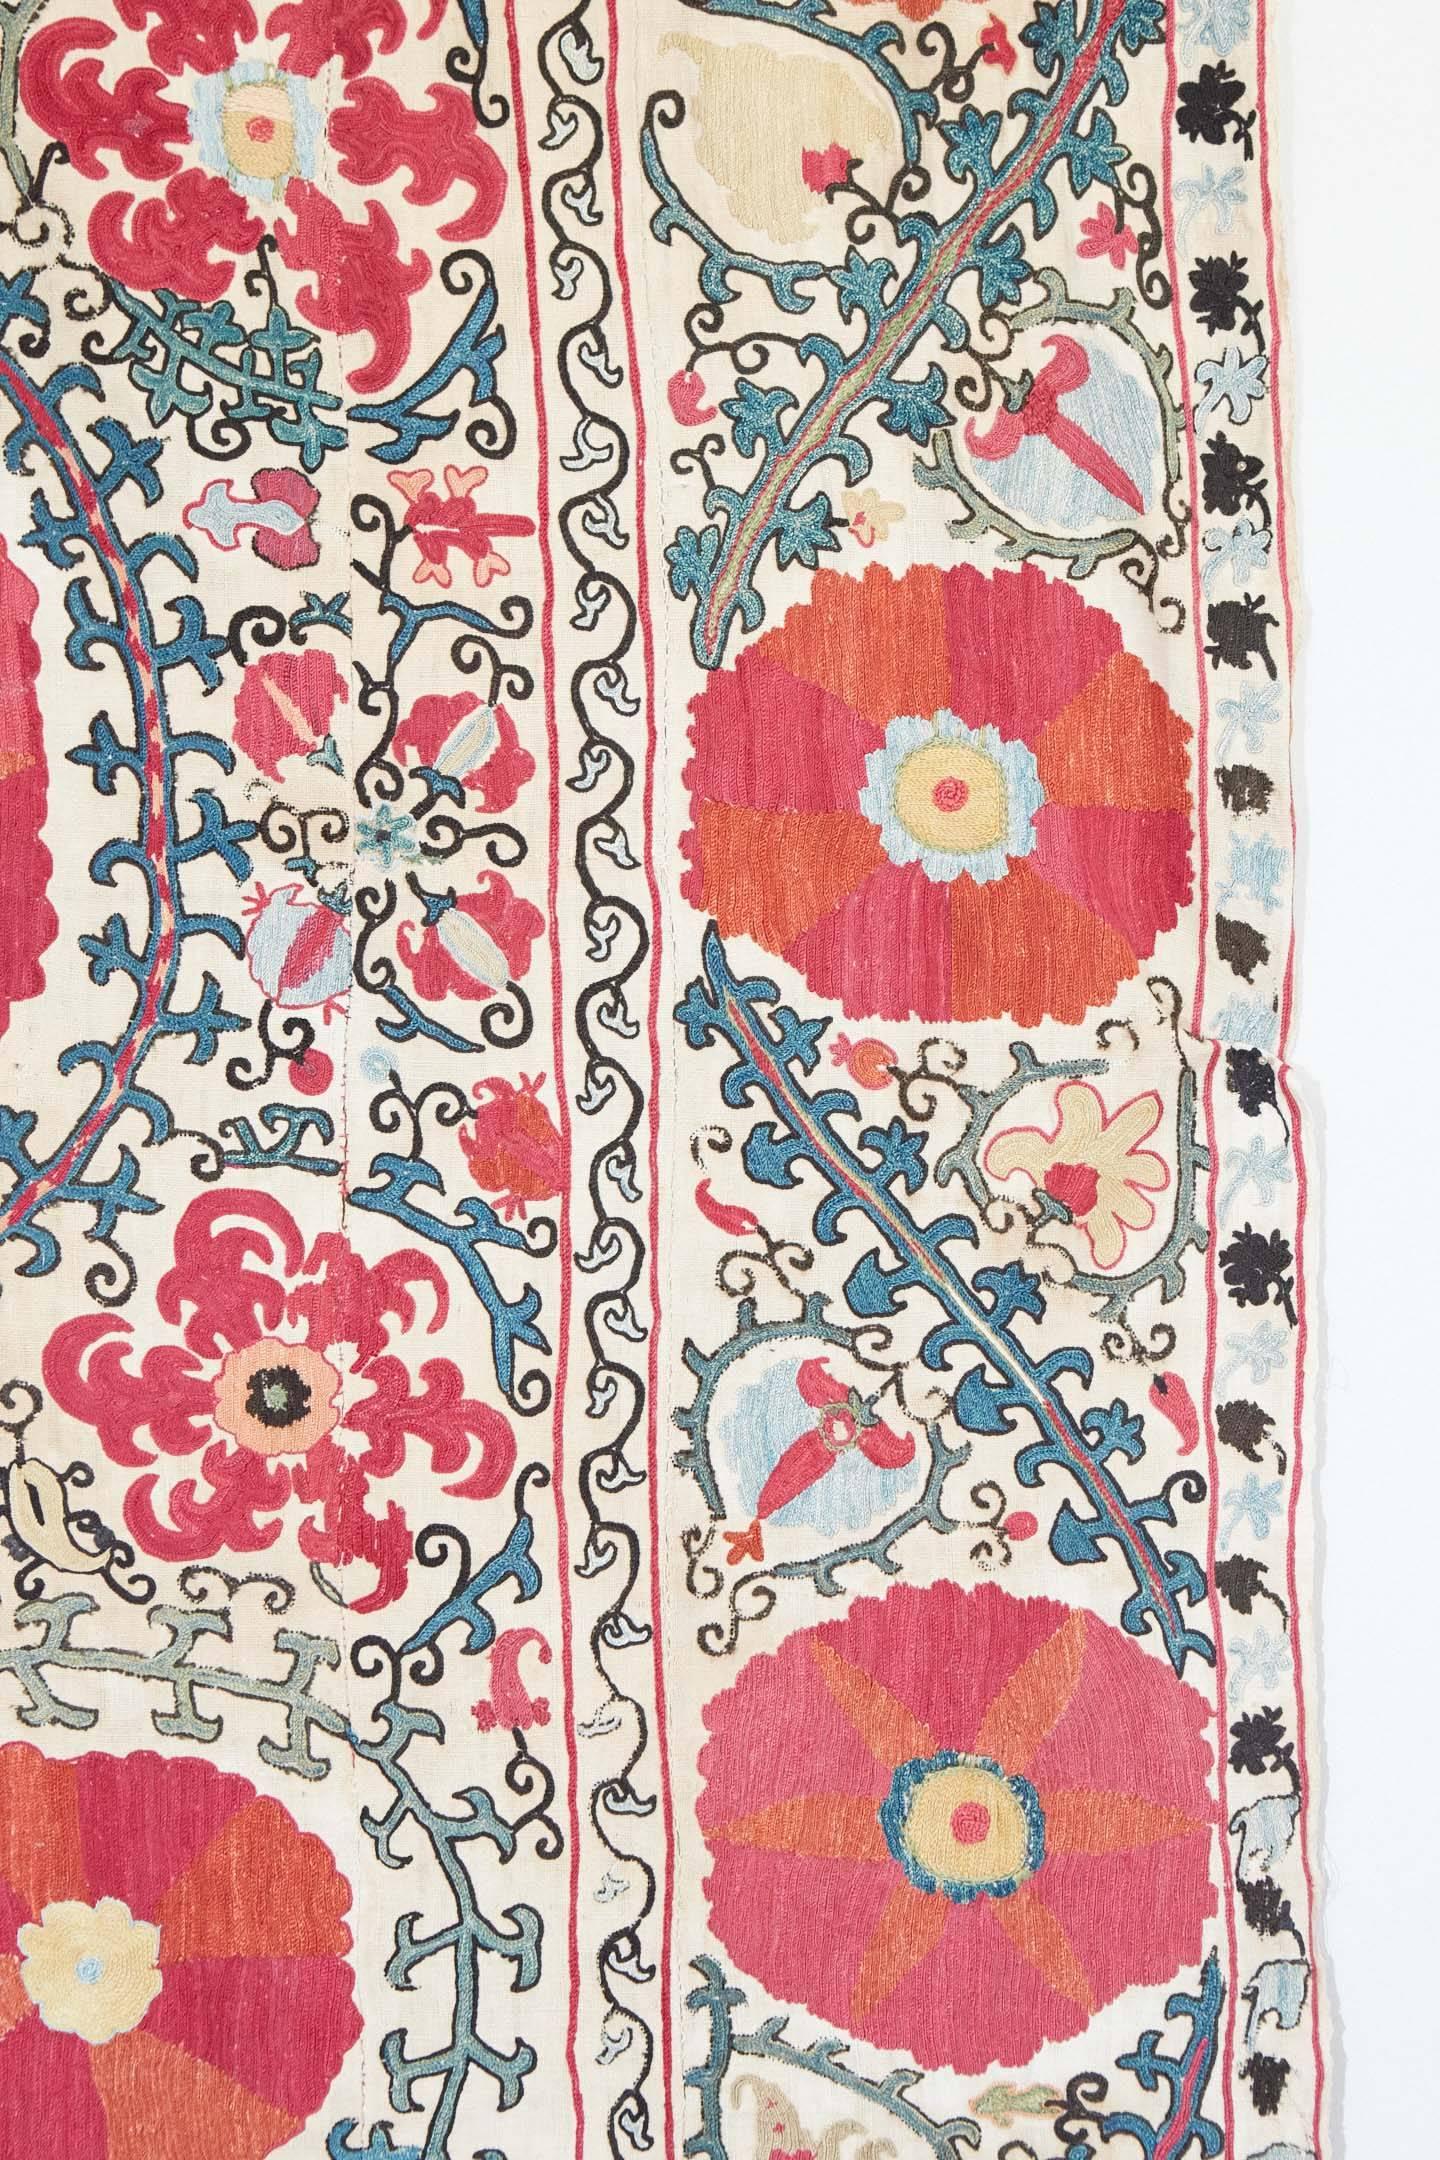 Central Asian Antique Bukhara Suzani Textile with Oranges and Pinks